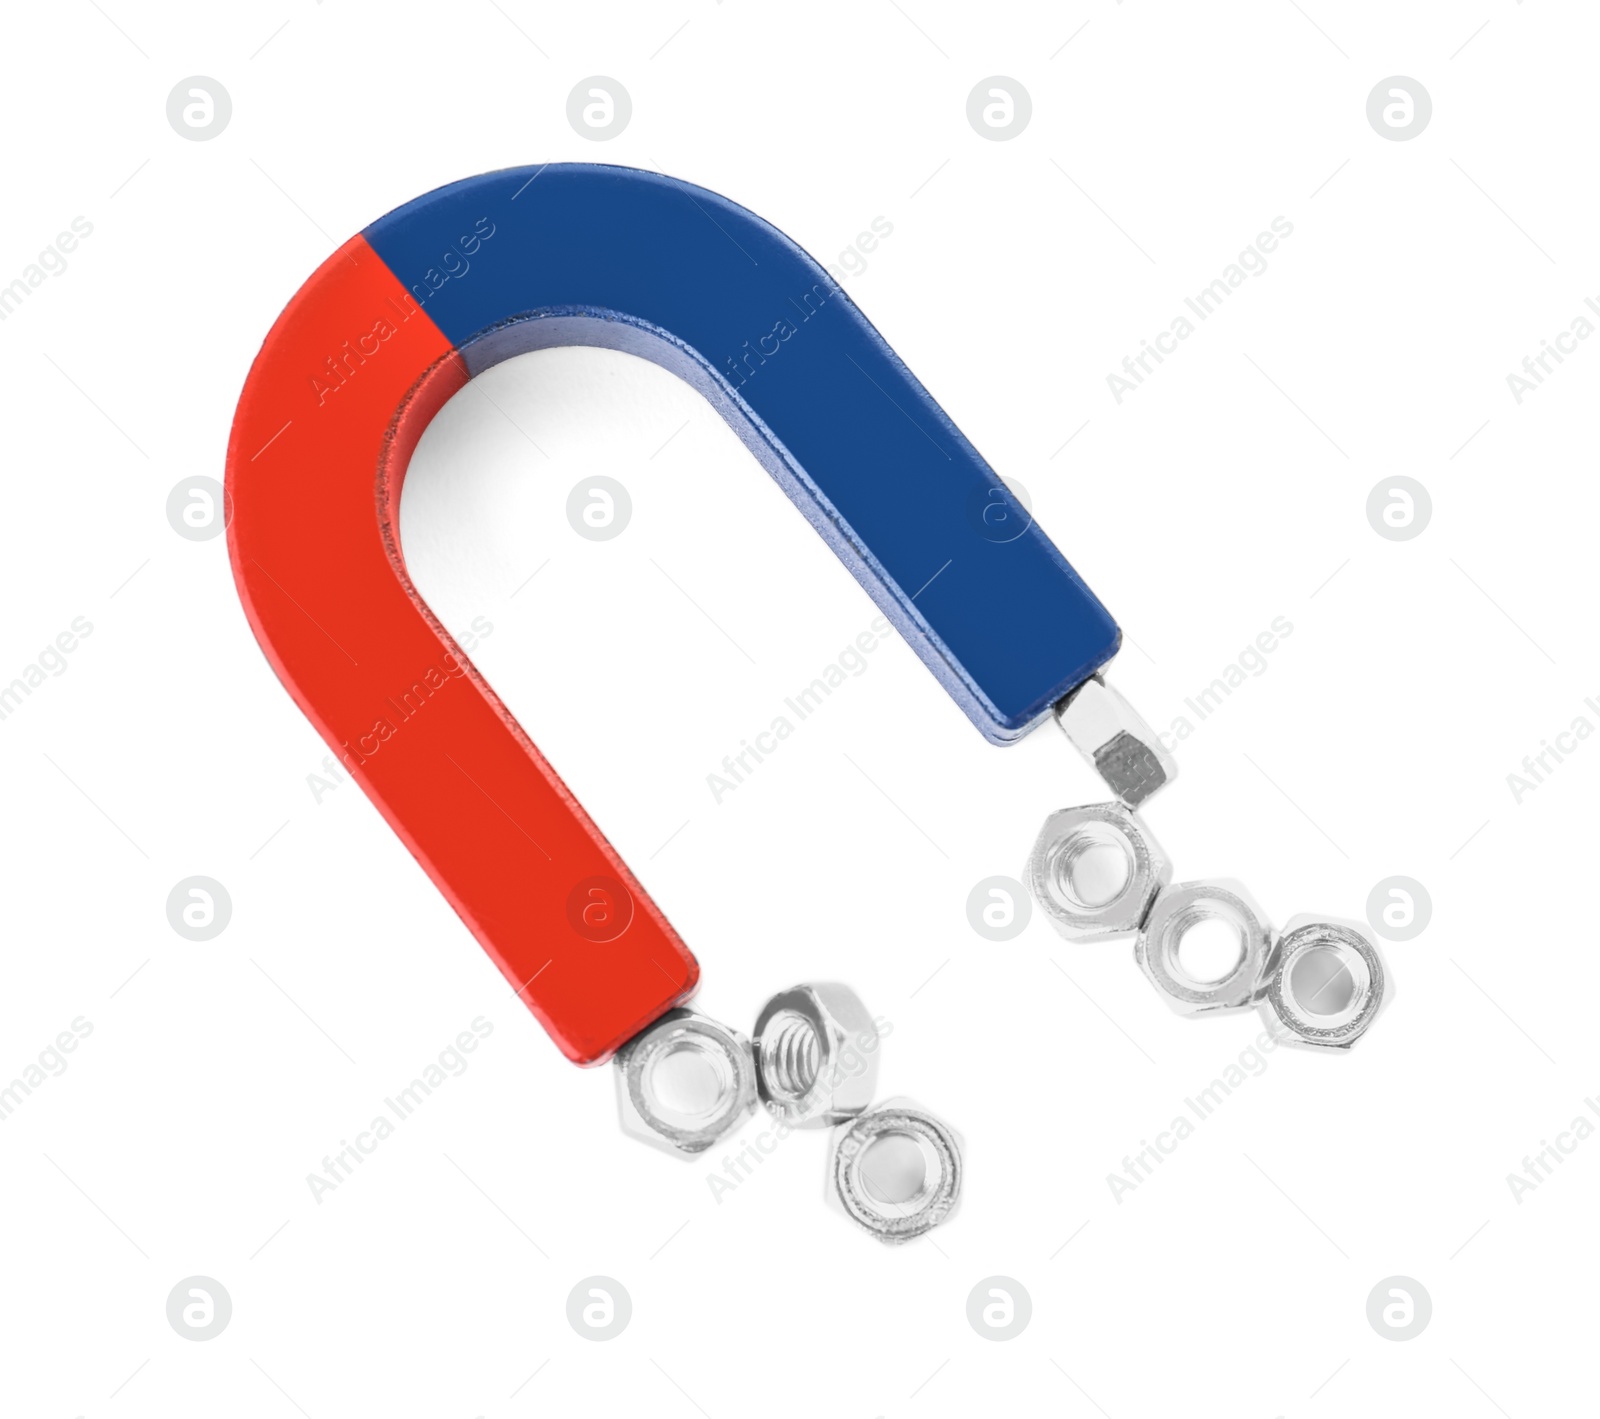 Photo of Magnet attracting metal nuts on white background, top view